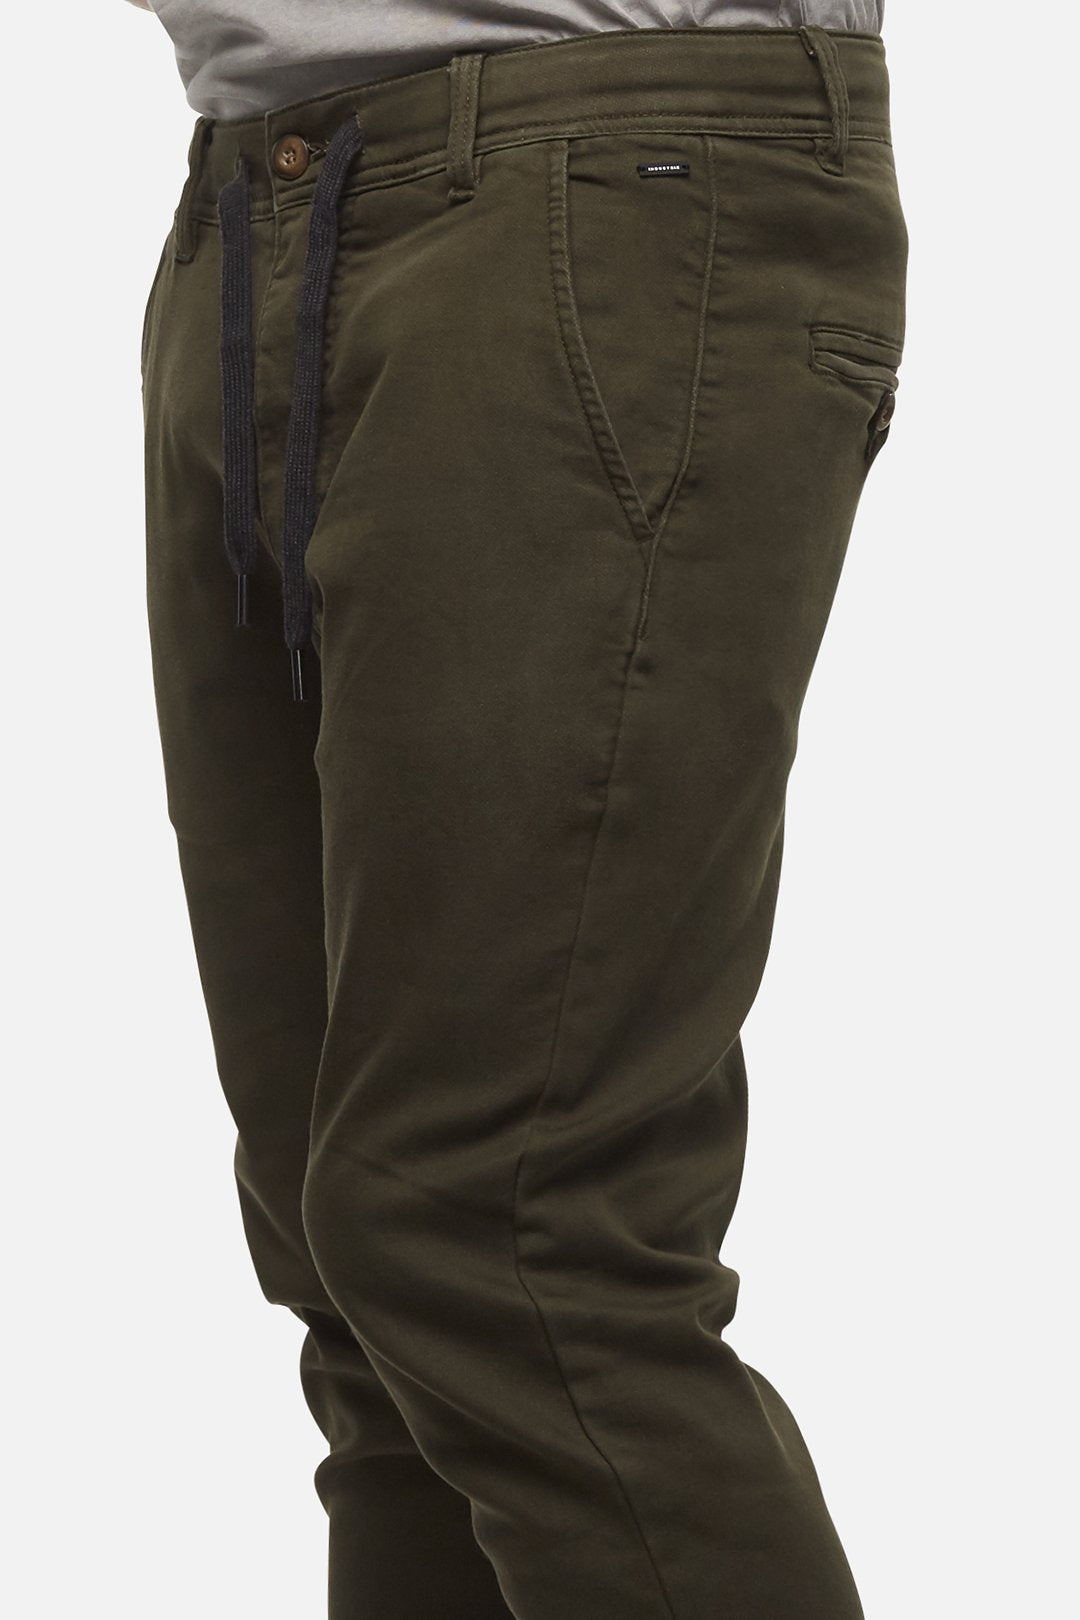 INDUSTRIE THE DRIFTER CHINO PANT ARMY GREEN